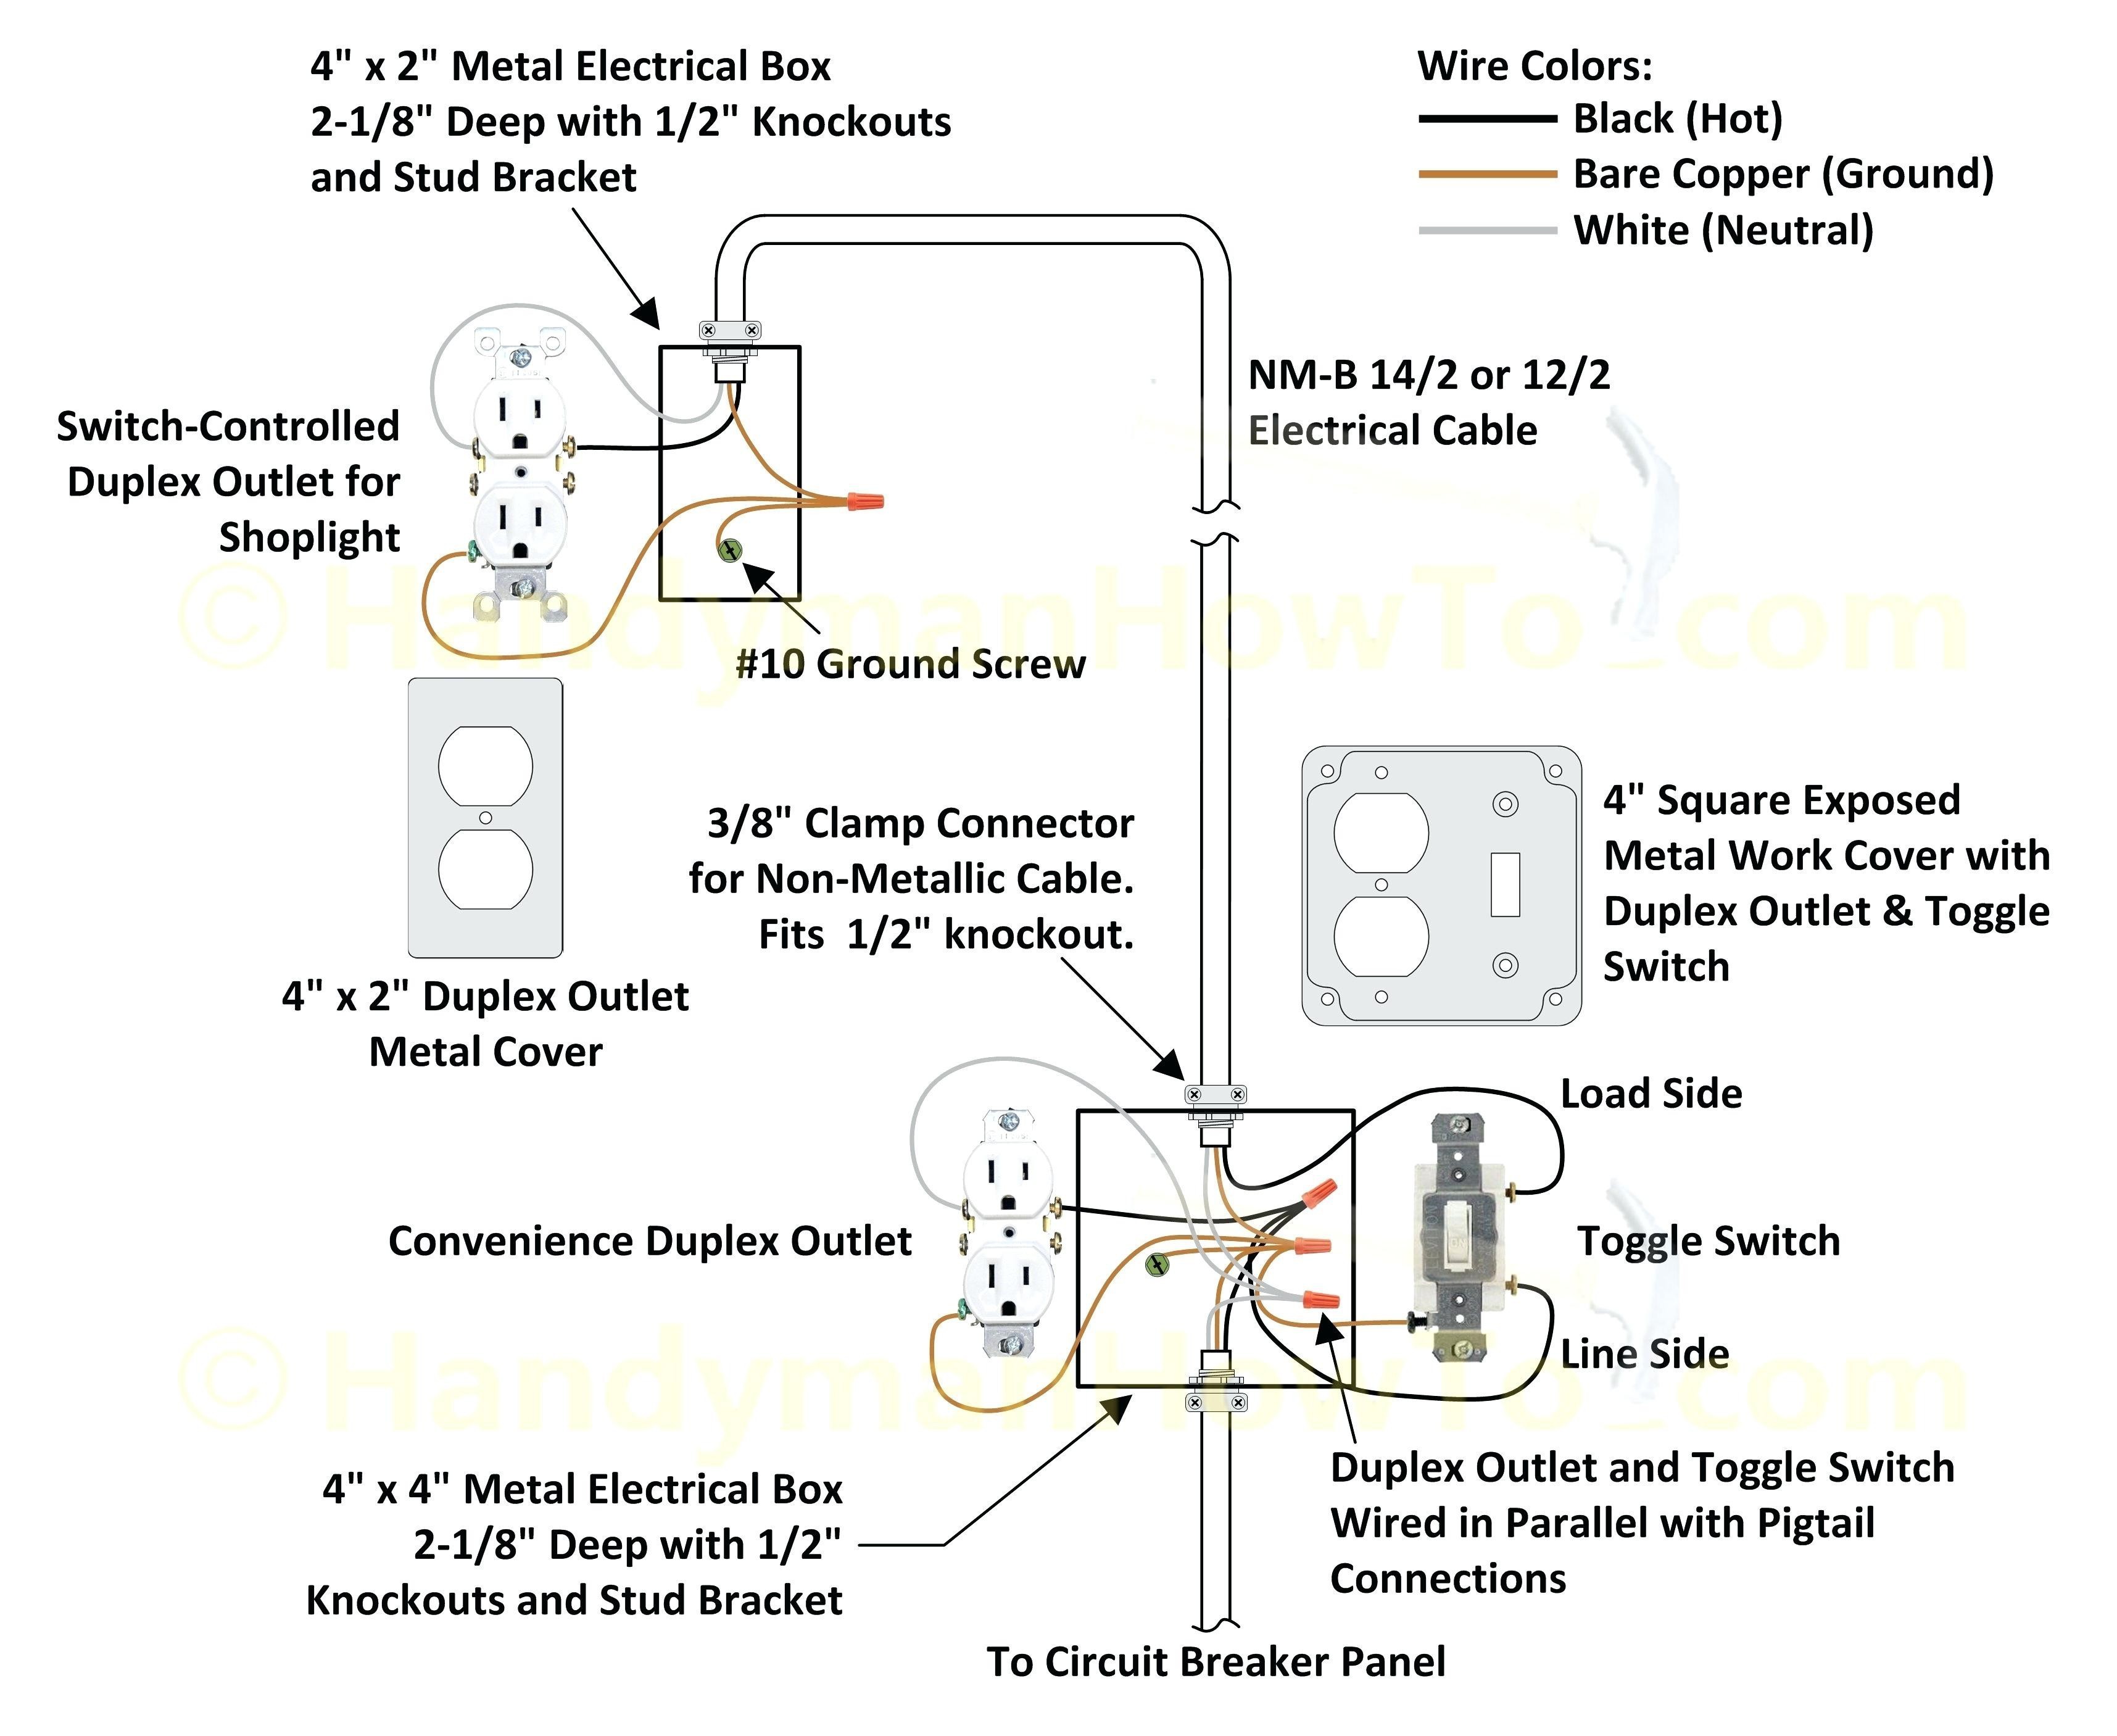 Wiring Diagram for A 2 Speed whole House Fan Vr 5016] Fan Circuit Type 1 Smcblack Speed Switch Three Wire Of Wiring Diagram for A 2 Speed whole House Fan